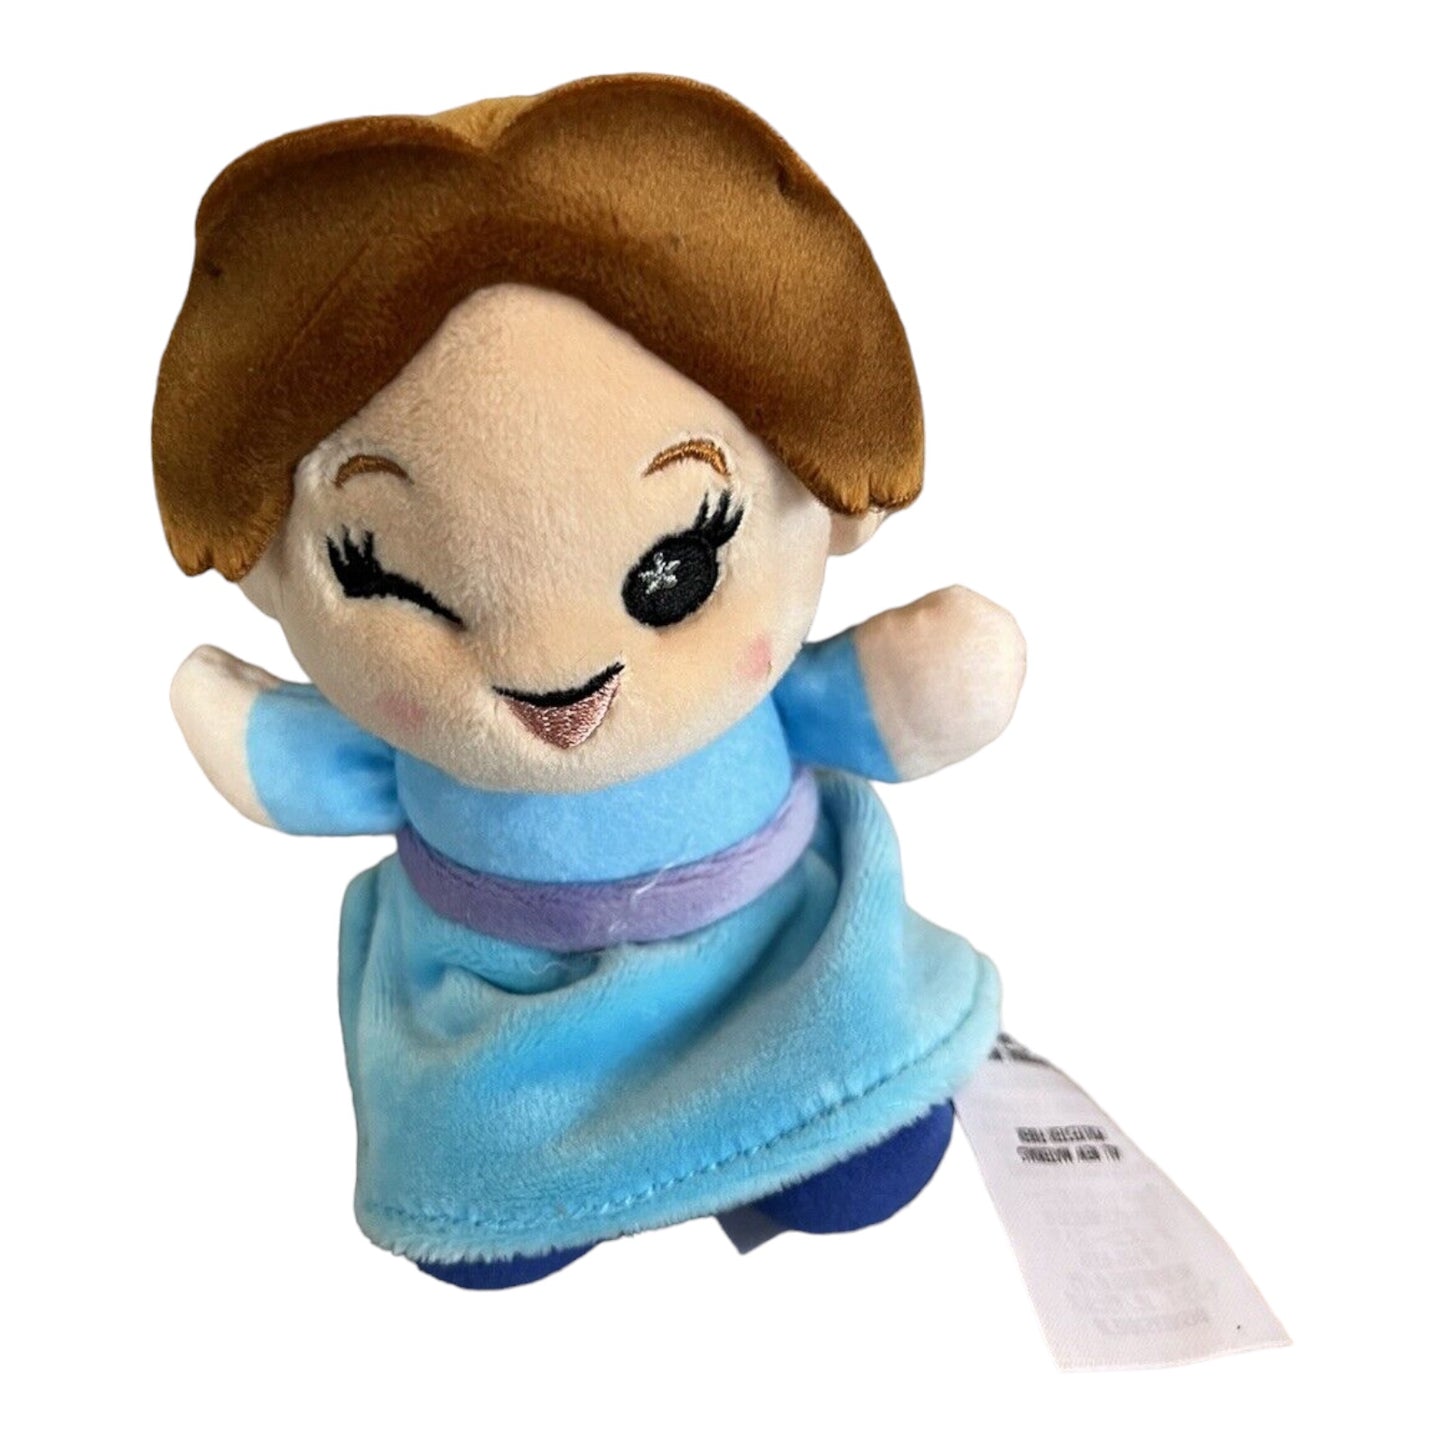 Peter Pan's Flight Wendy Darling Wishable Plush - Limited Release